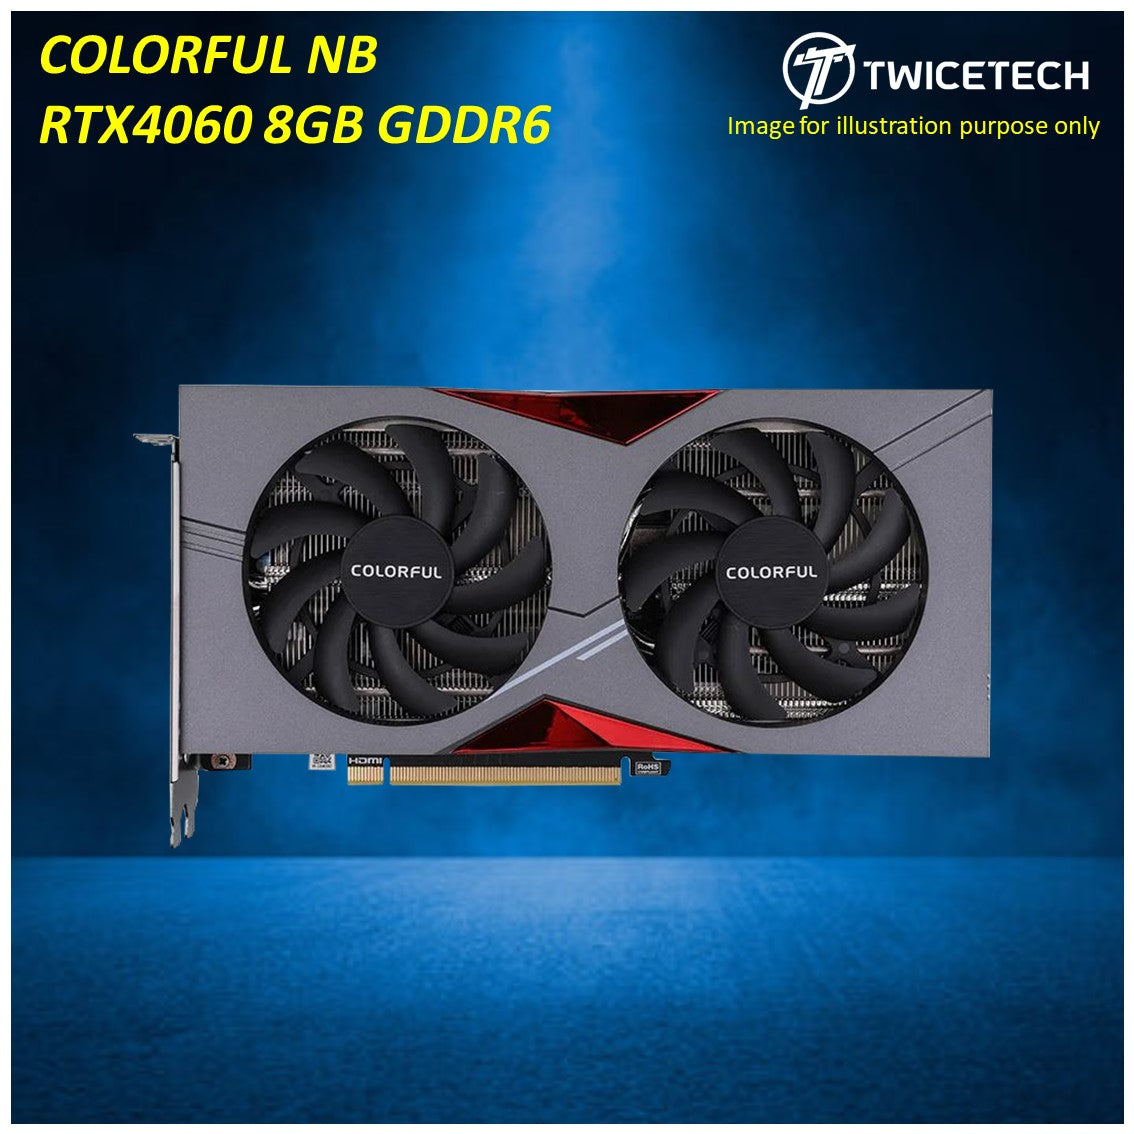 COLORFUL NB RTX4060 8GB GDDR6 GRAPHIC CARD